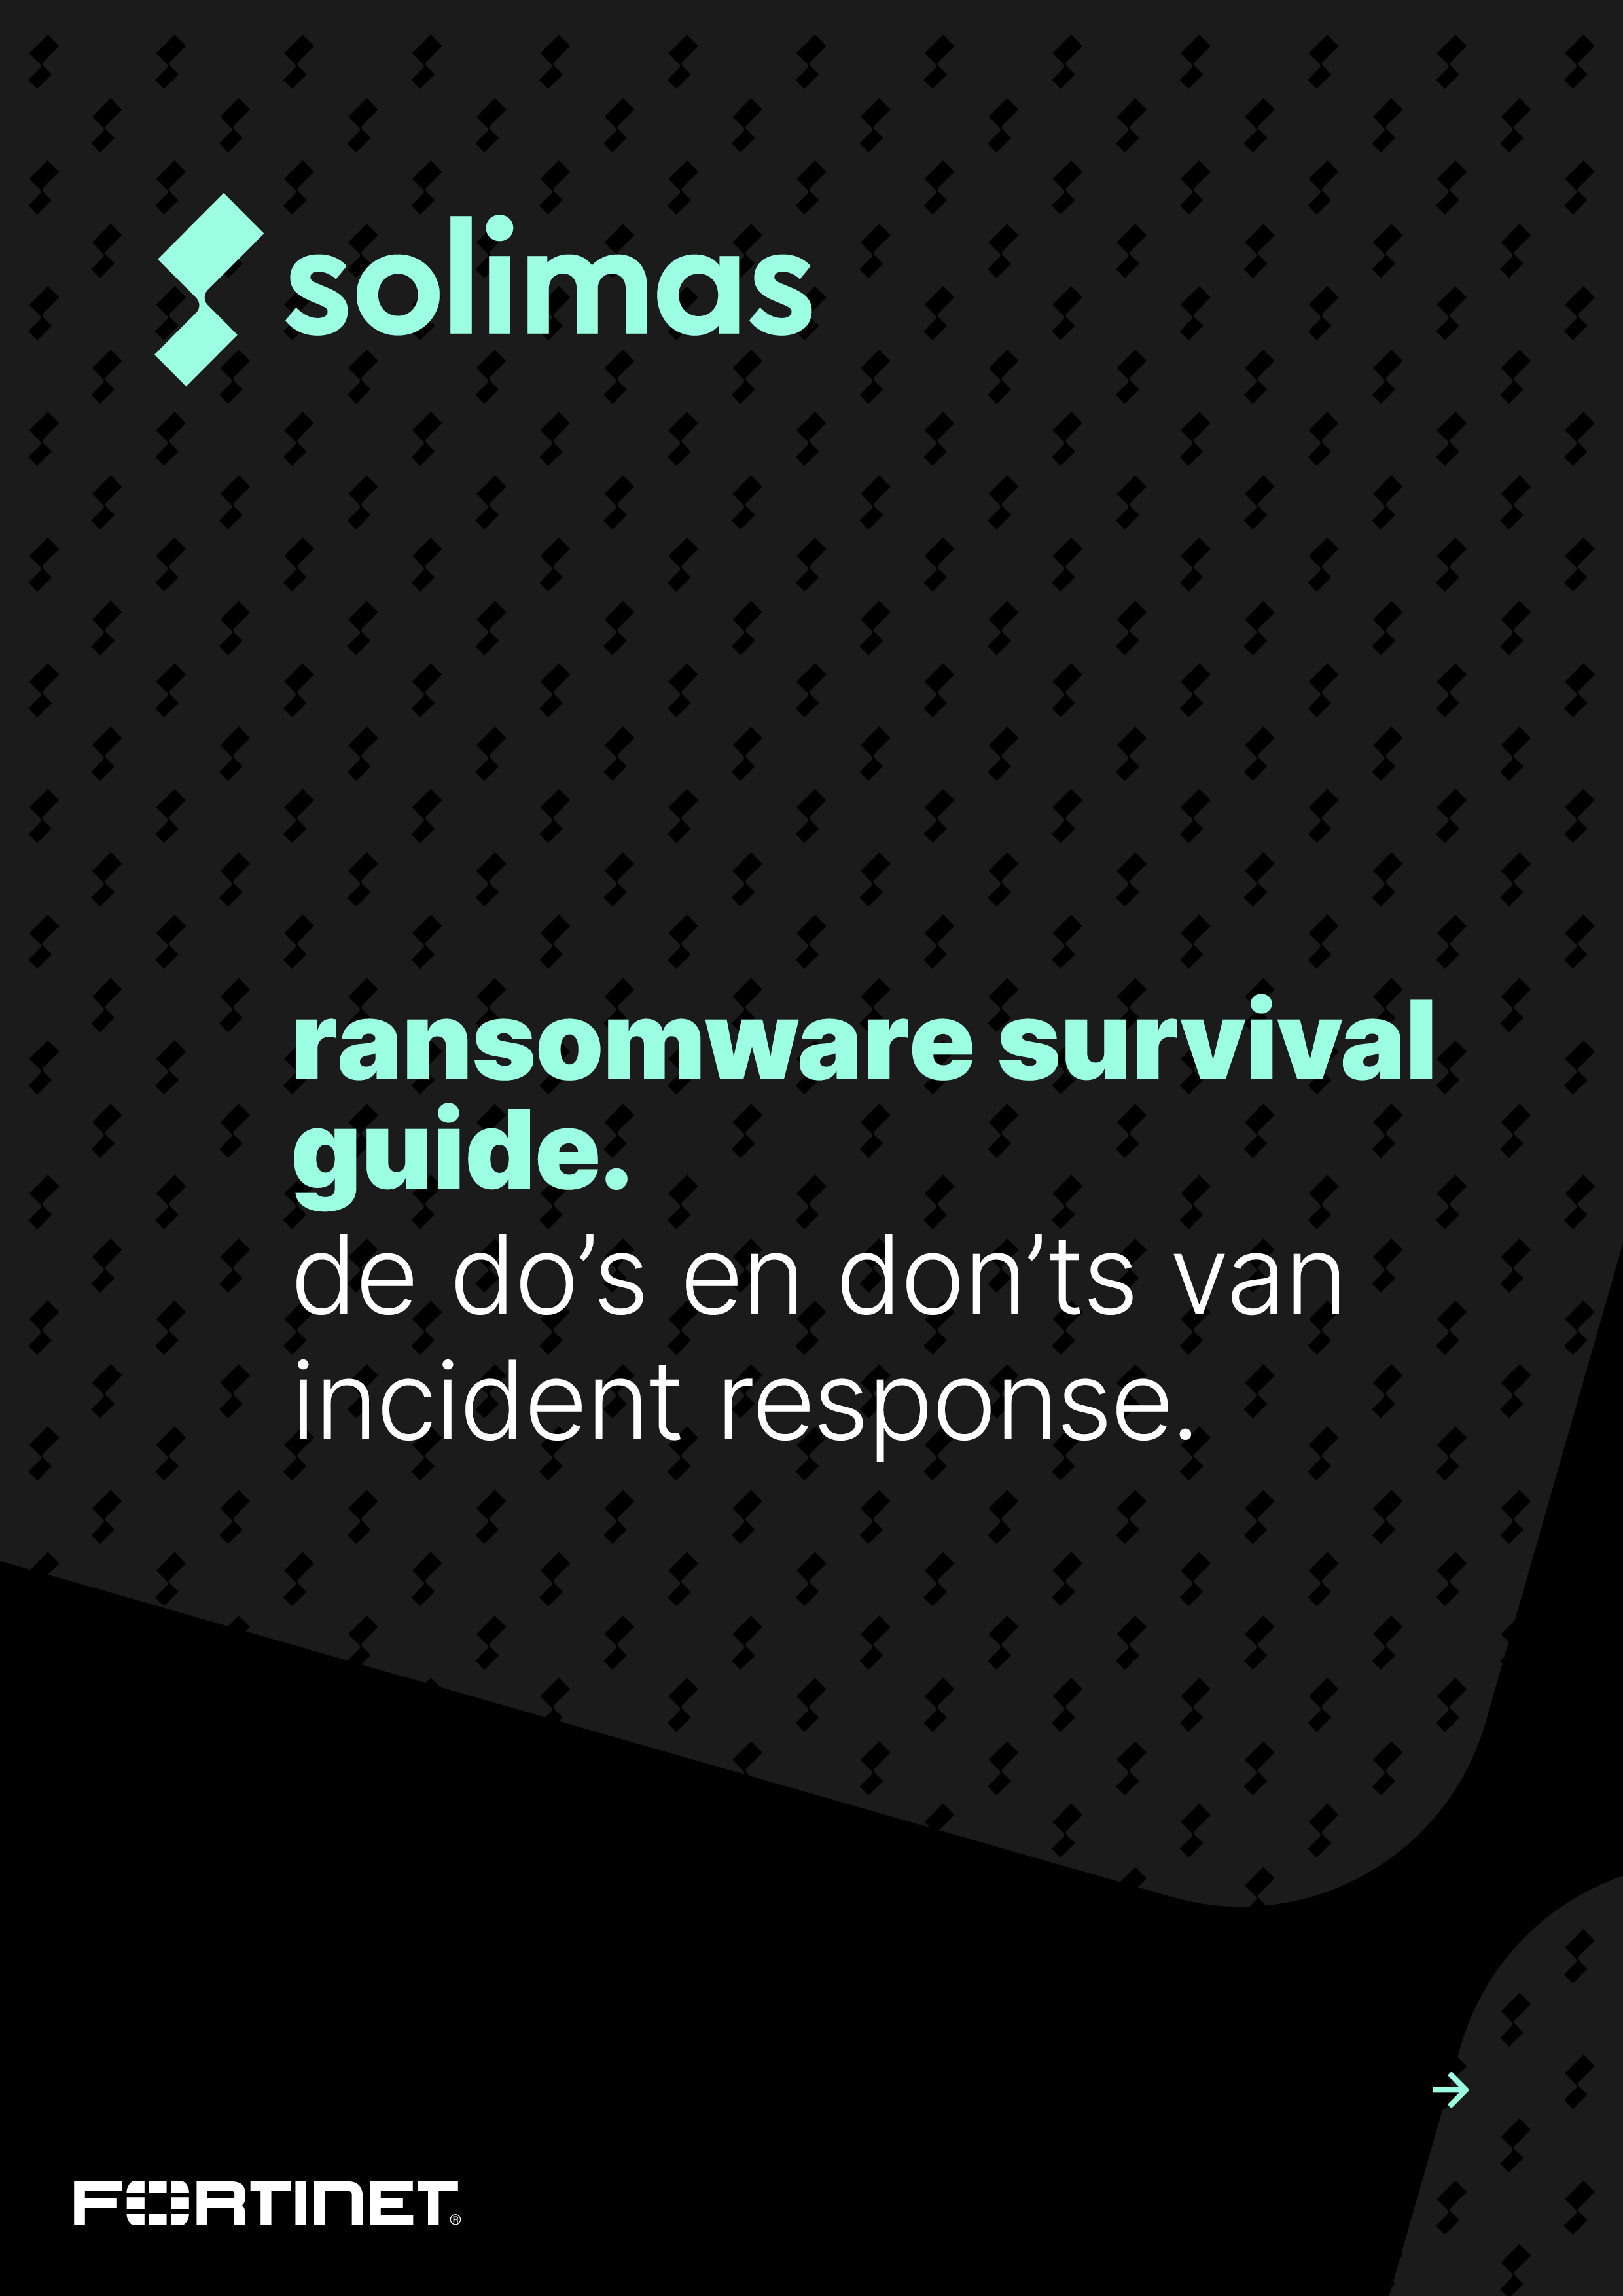 Ransomware survival guide frontpage-1